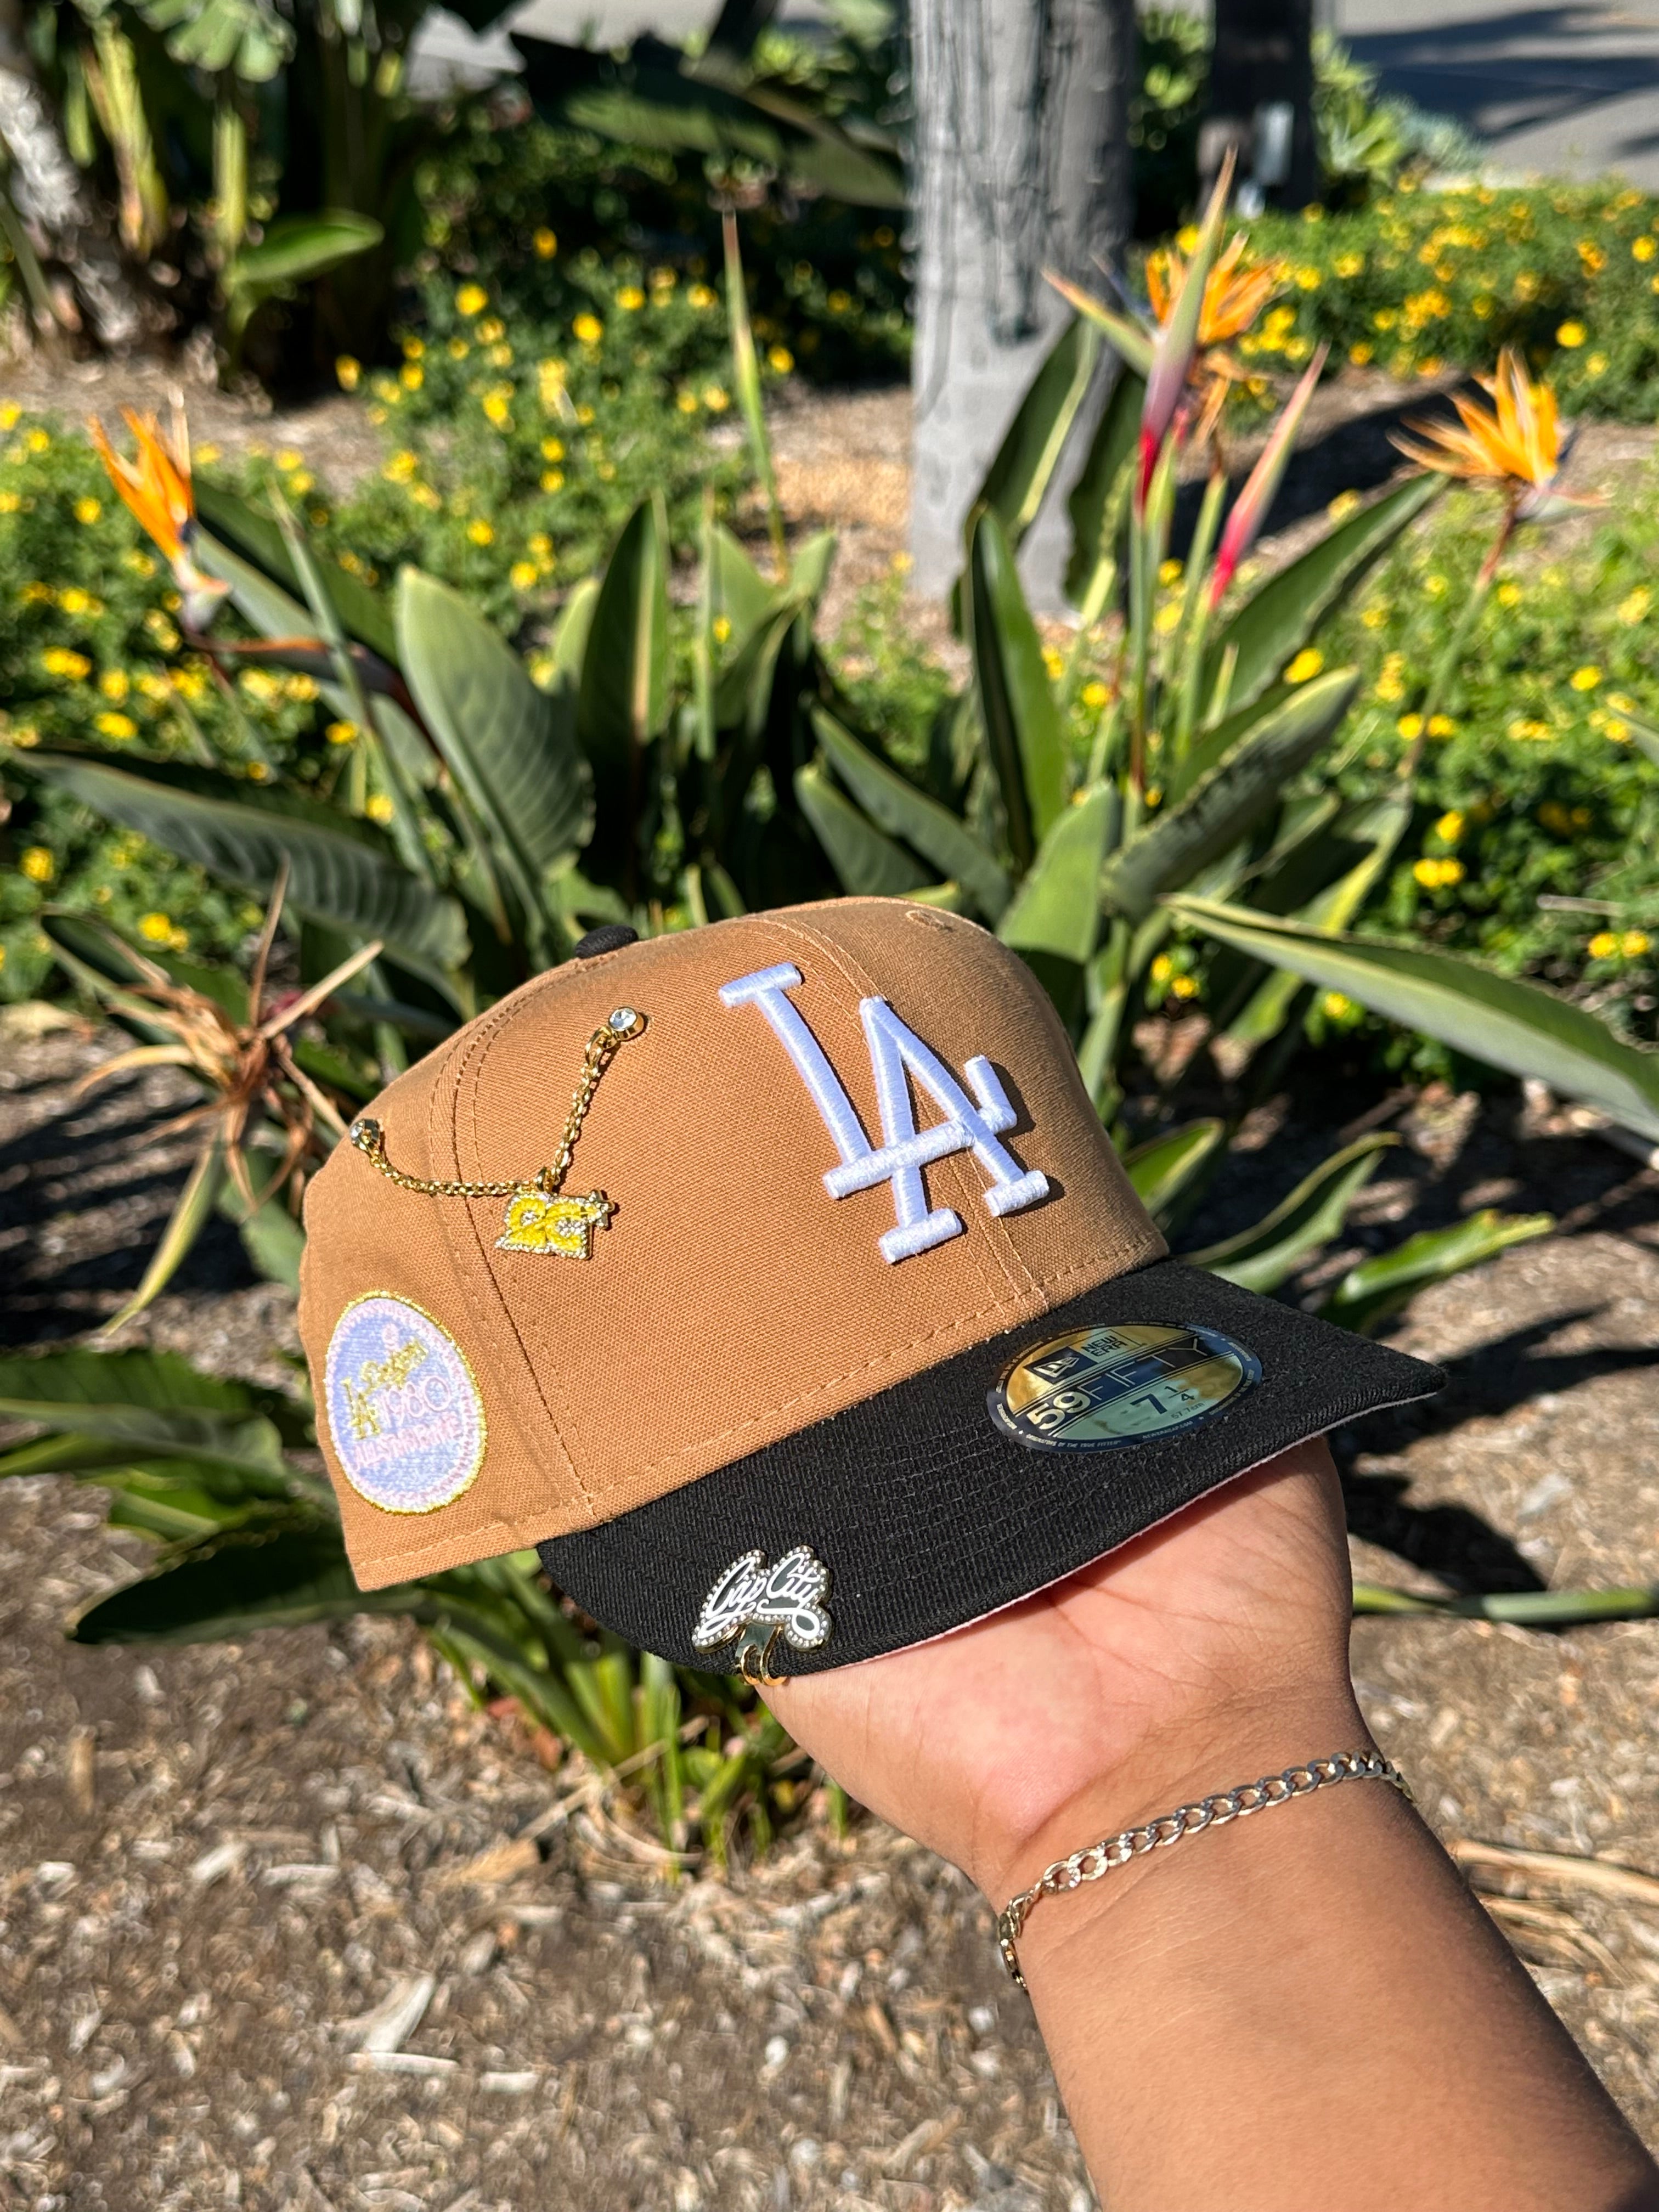 NEW ERA EXCLUSIVE 59FIFTY TAN/BLACK LOS ANGELES DODGERS W/ 1980 ALL STAR GAME PATCH + FIRST WORLD SERIES PATCH